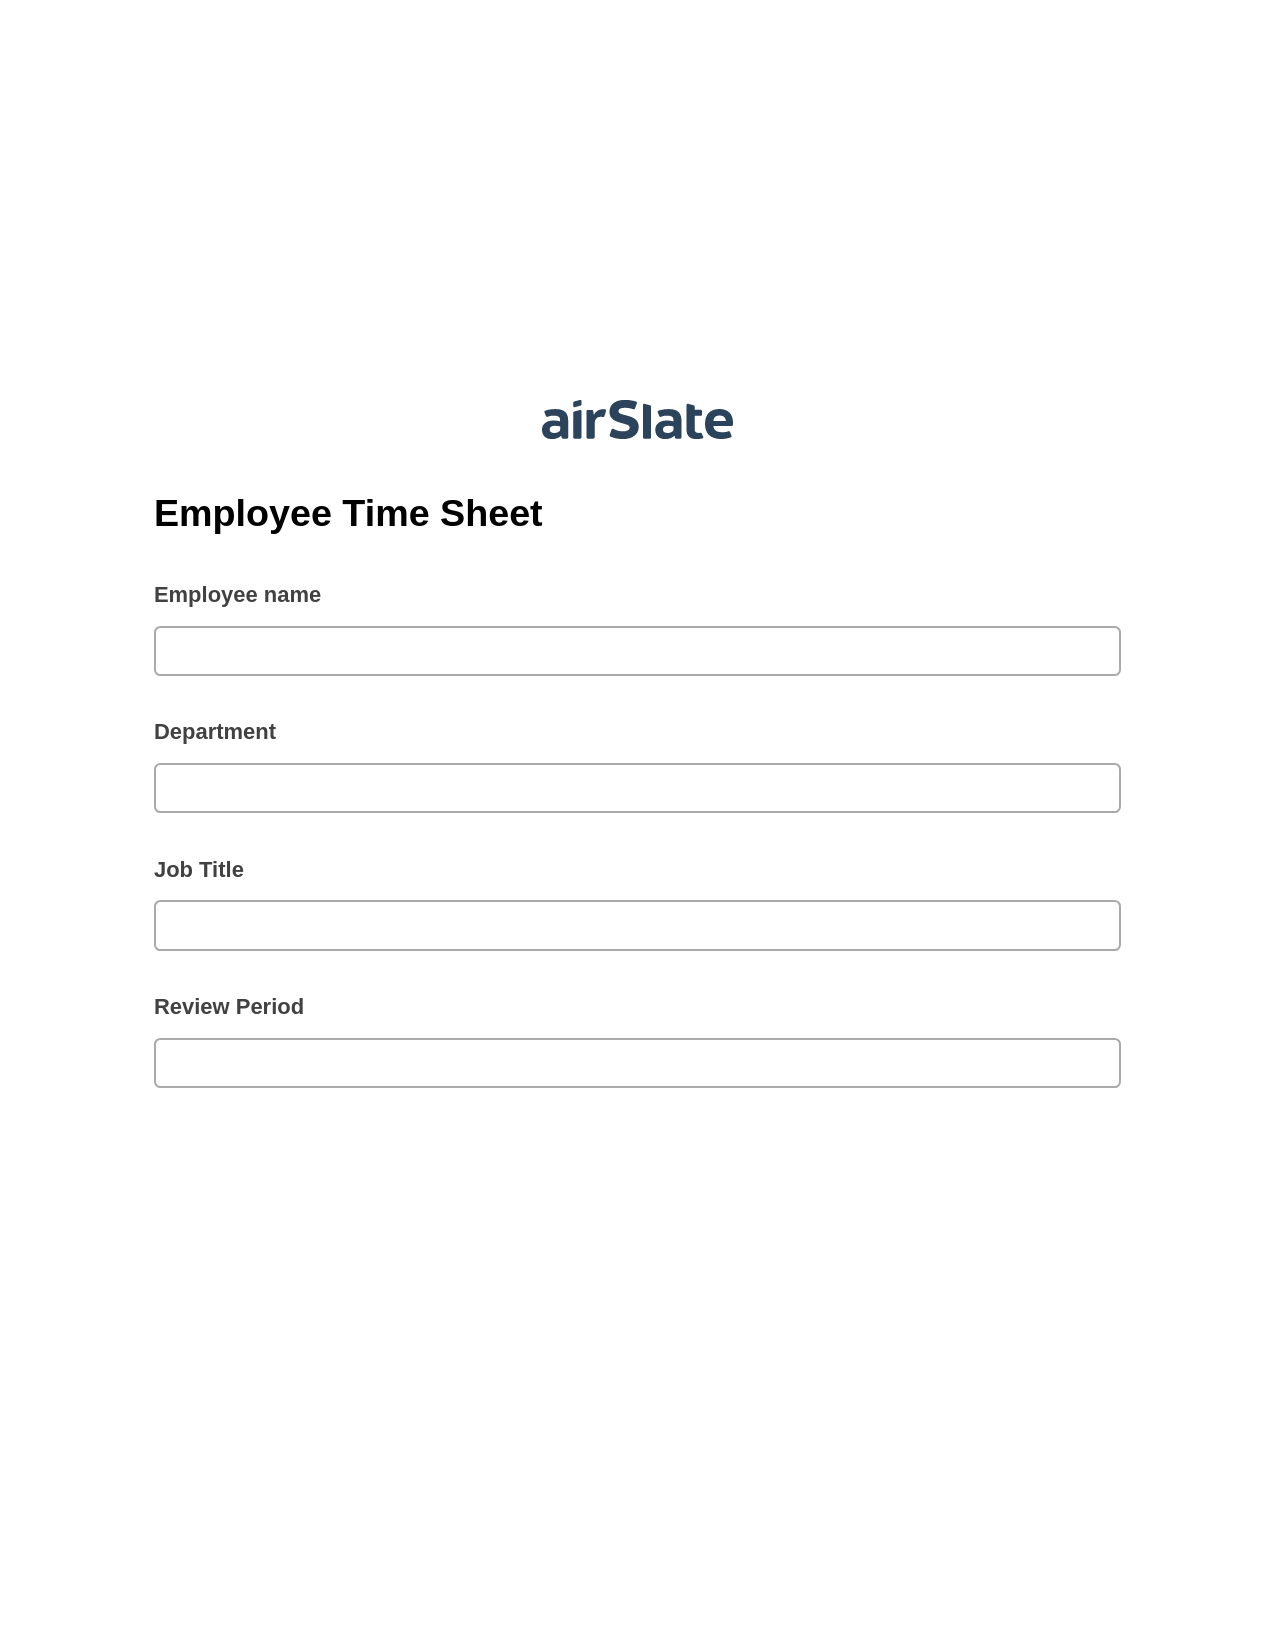 Employee Time Sheet Pre-fill from MS Dynamics 365 Records, Update Audit Trail Bot, Email Notification Postfinish Bot